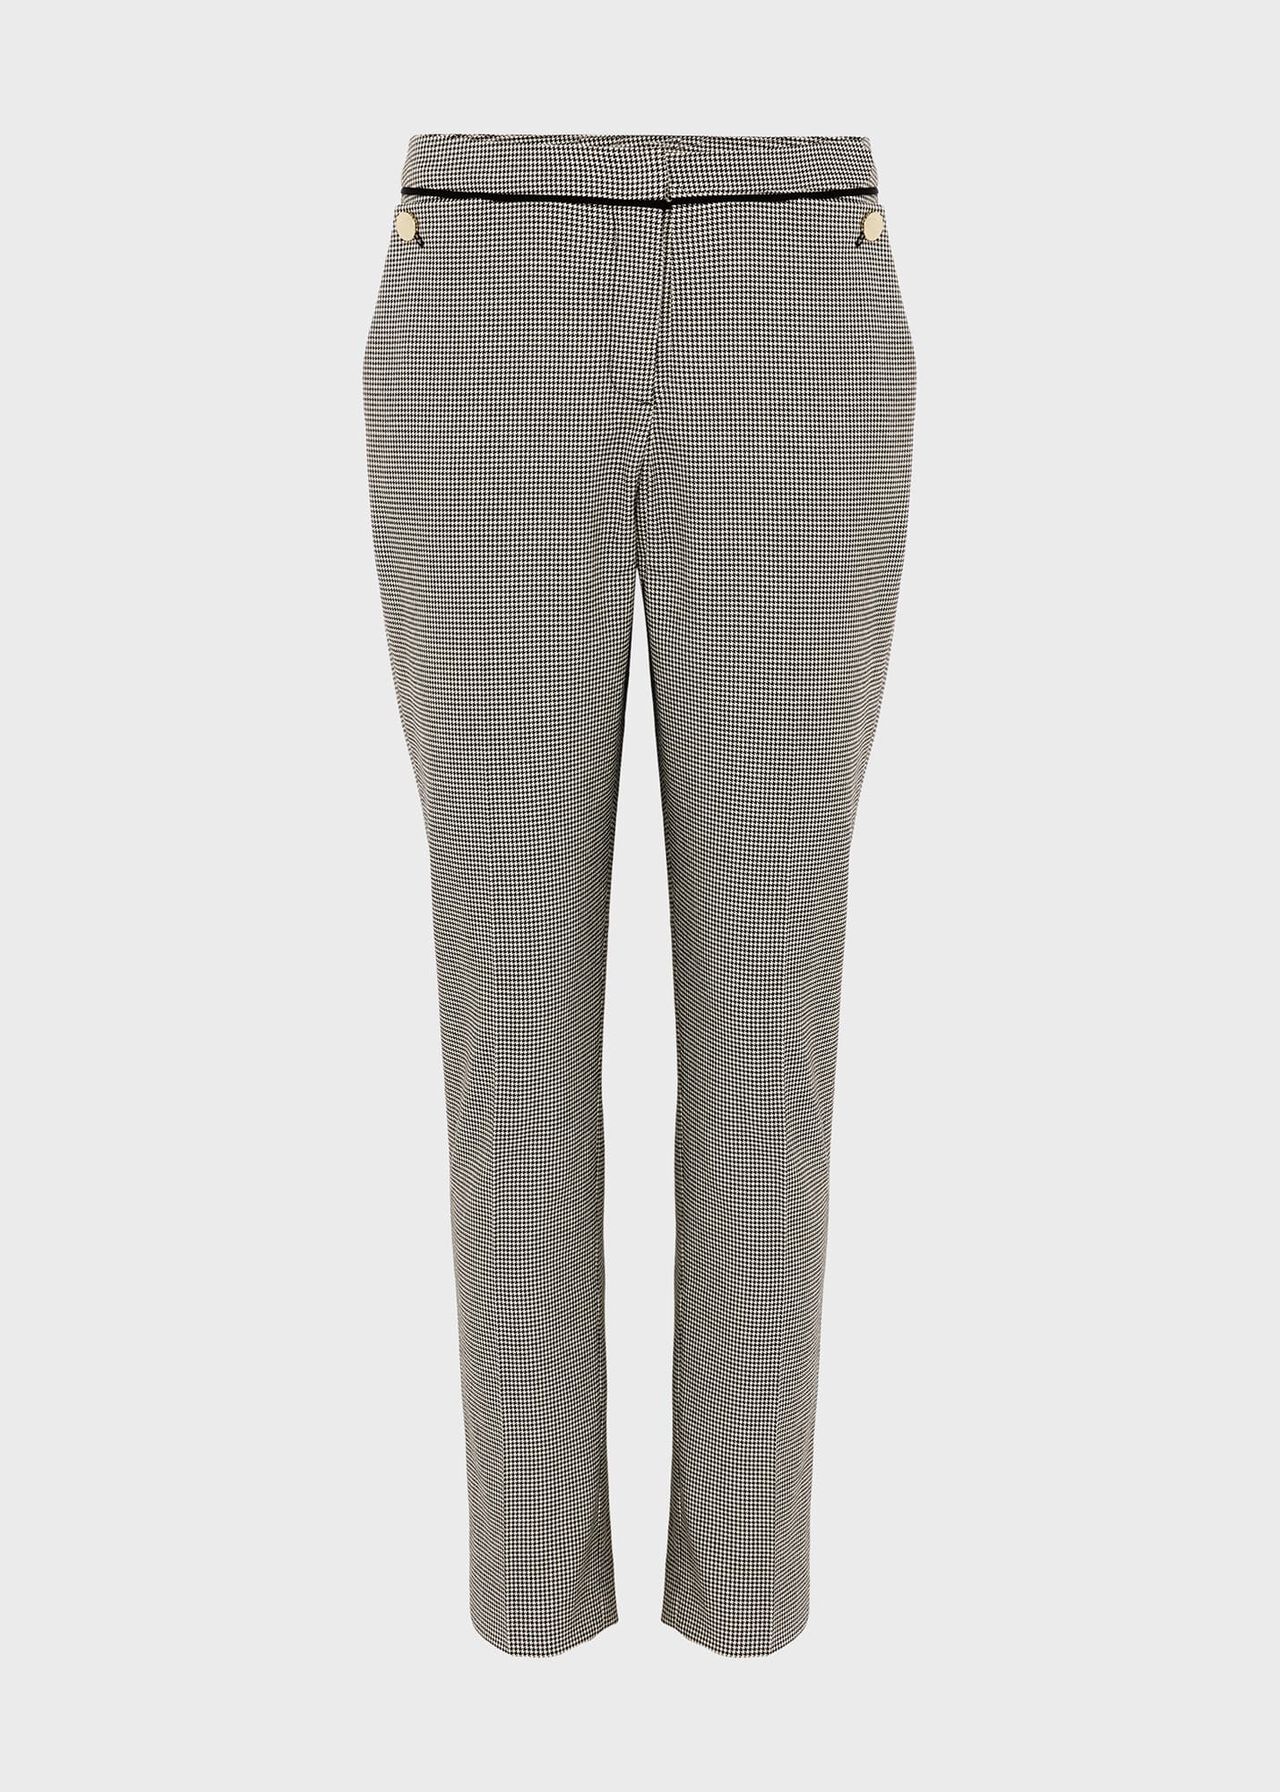 Sienna Houndstooth Slim trousers With Stretch, Ivory Black, hi-res